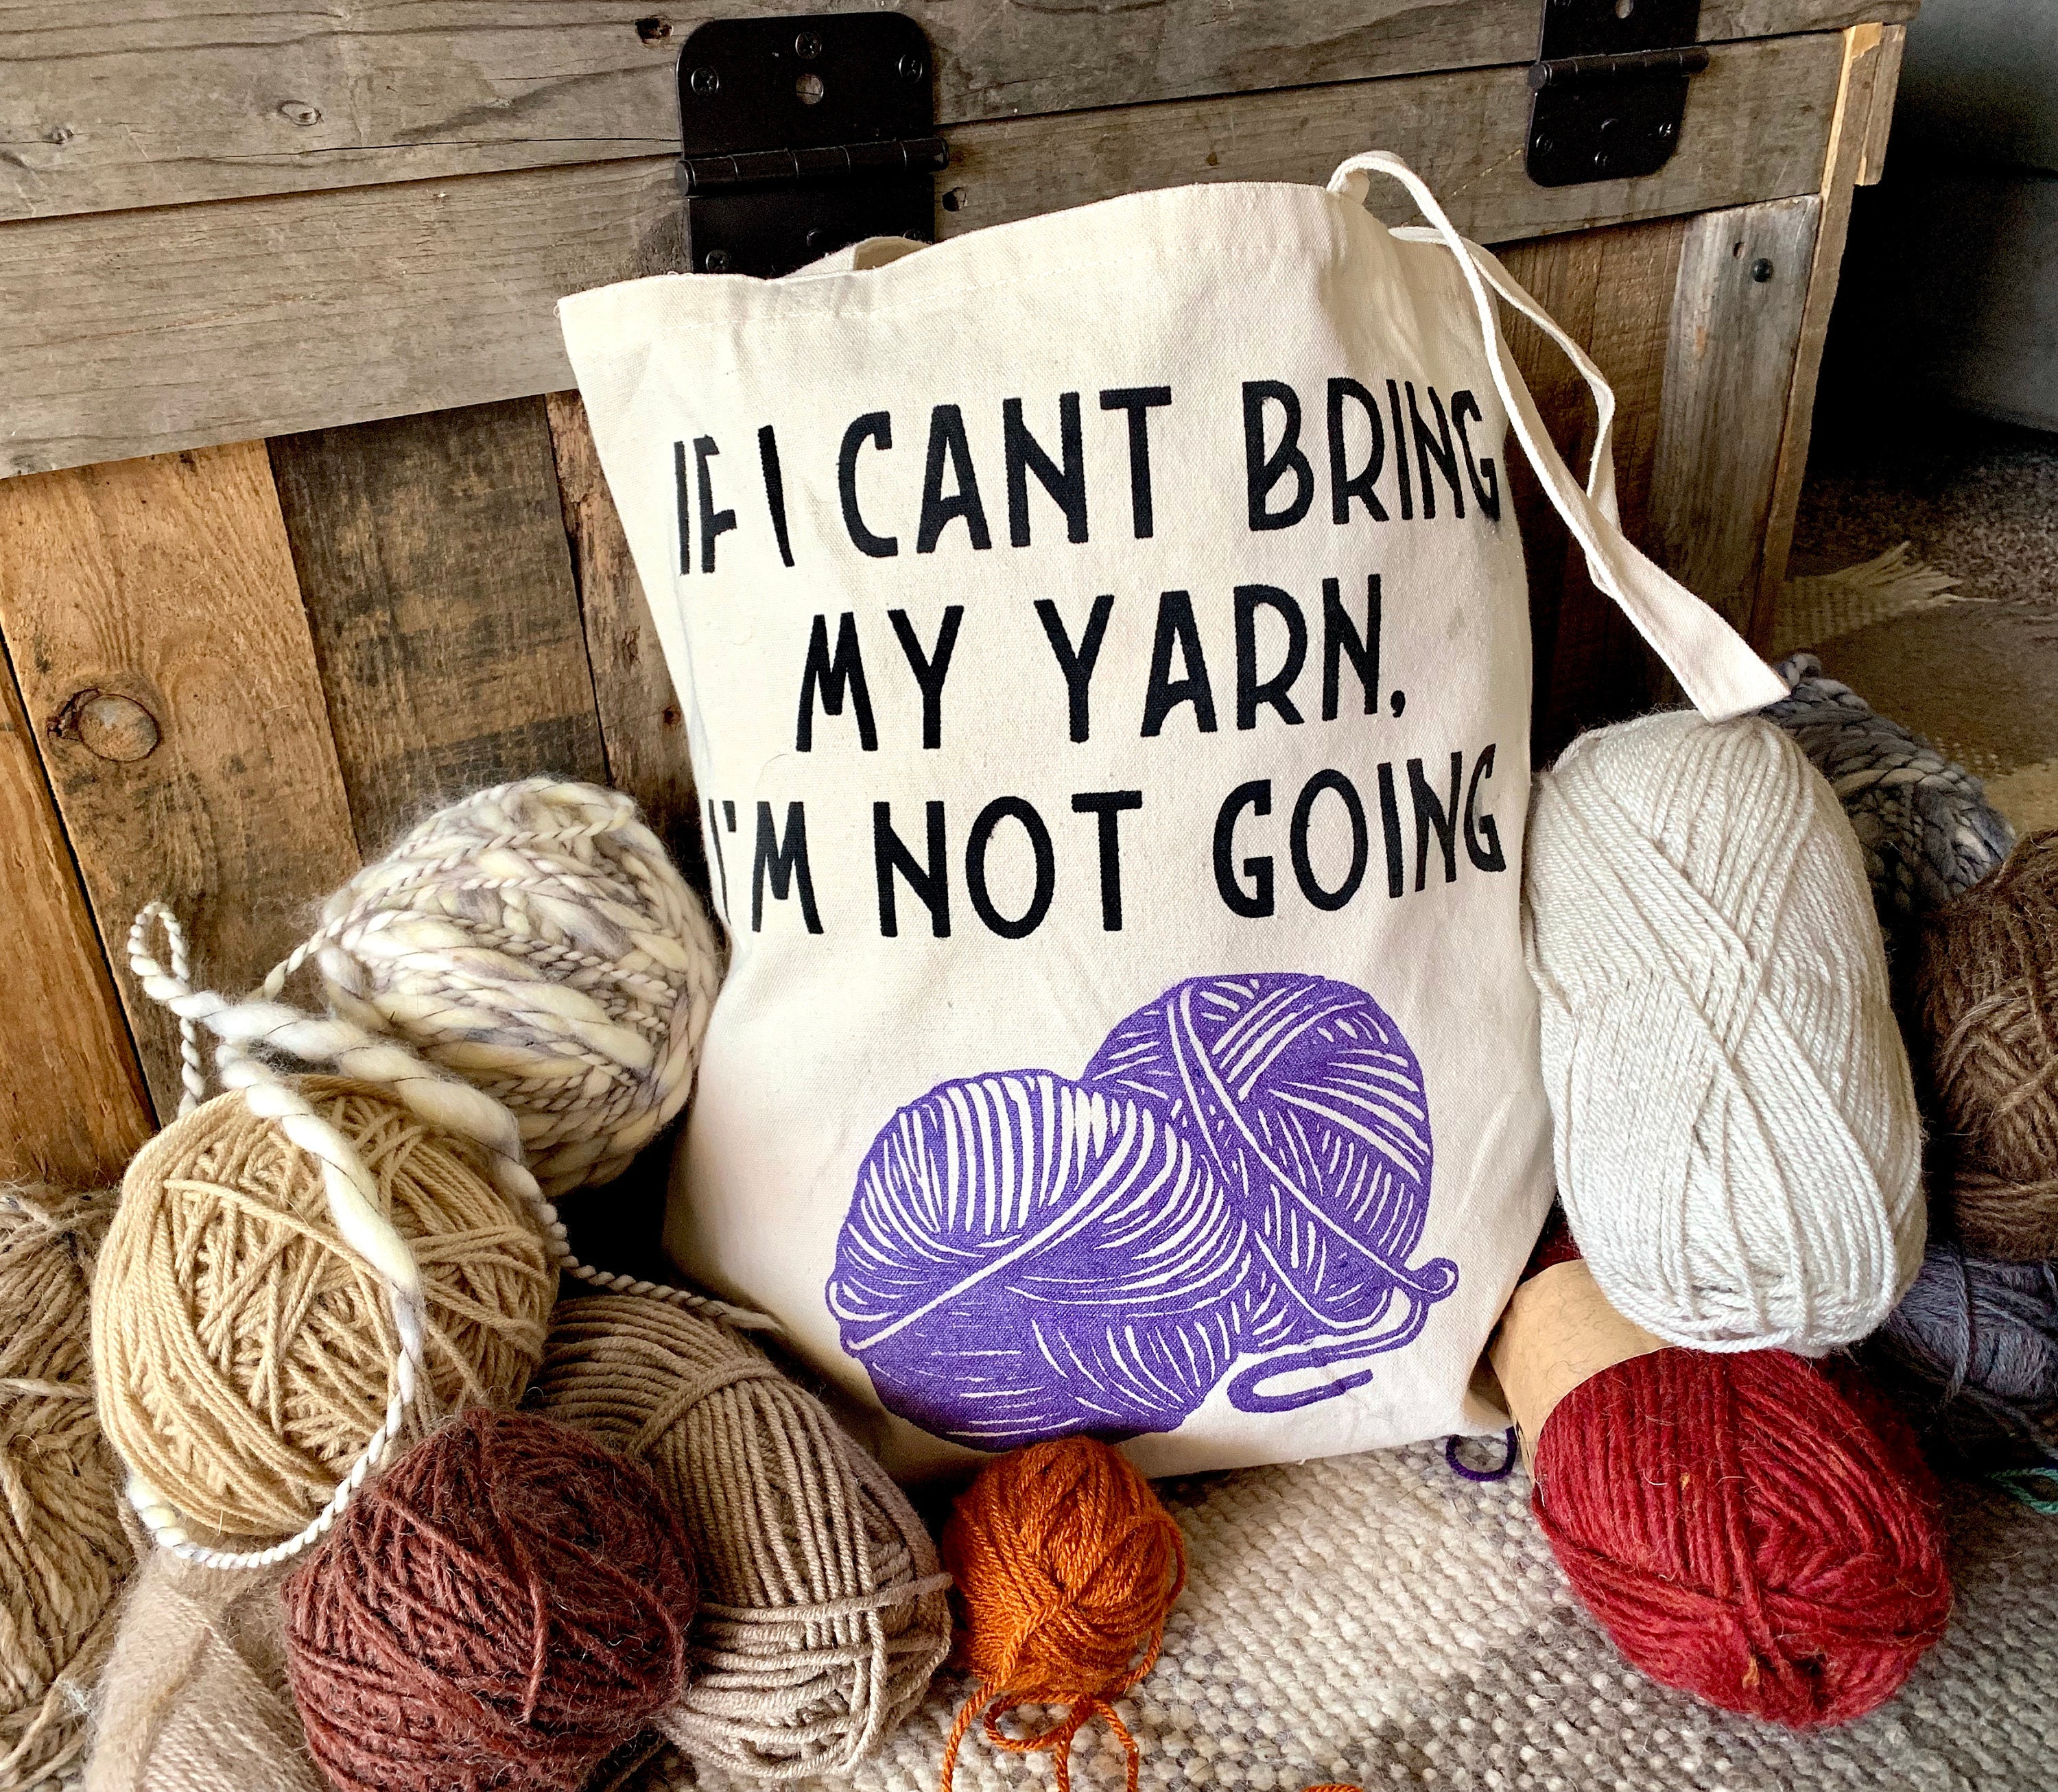 If I Can't Take My Yarn I'm Not Going - Funny Tumbler for Knitters and –  Jammin Threads